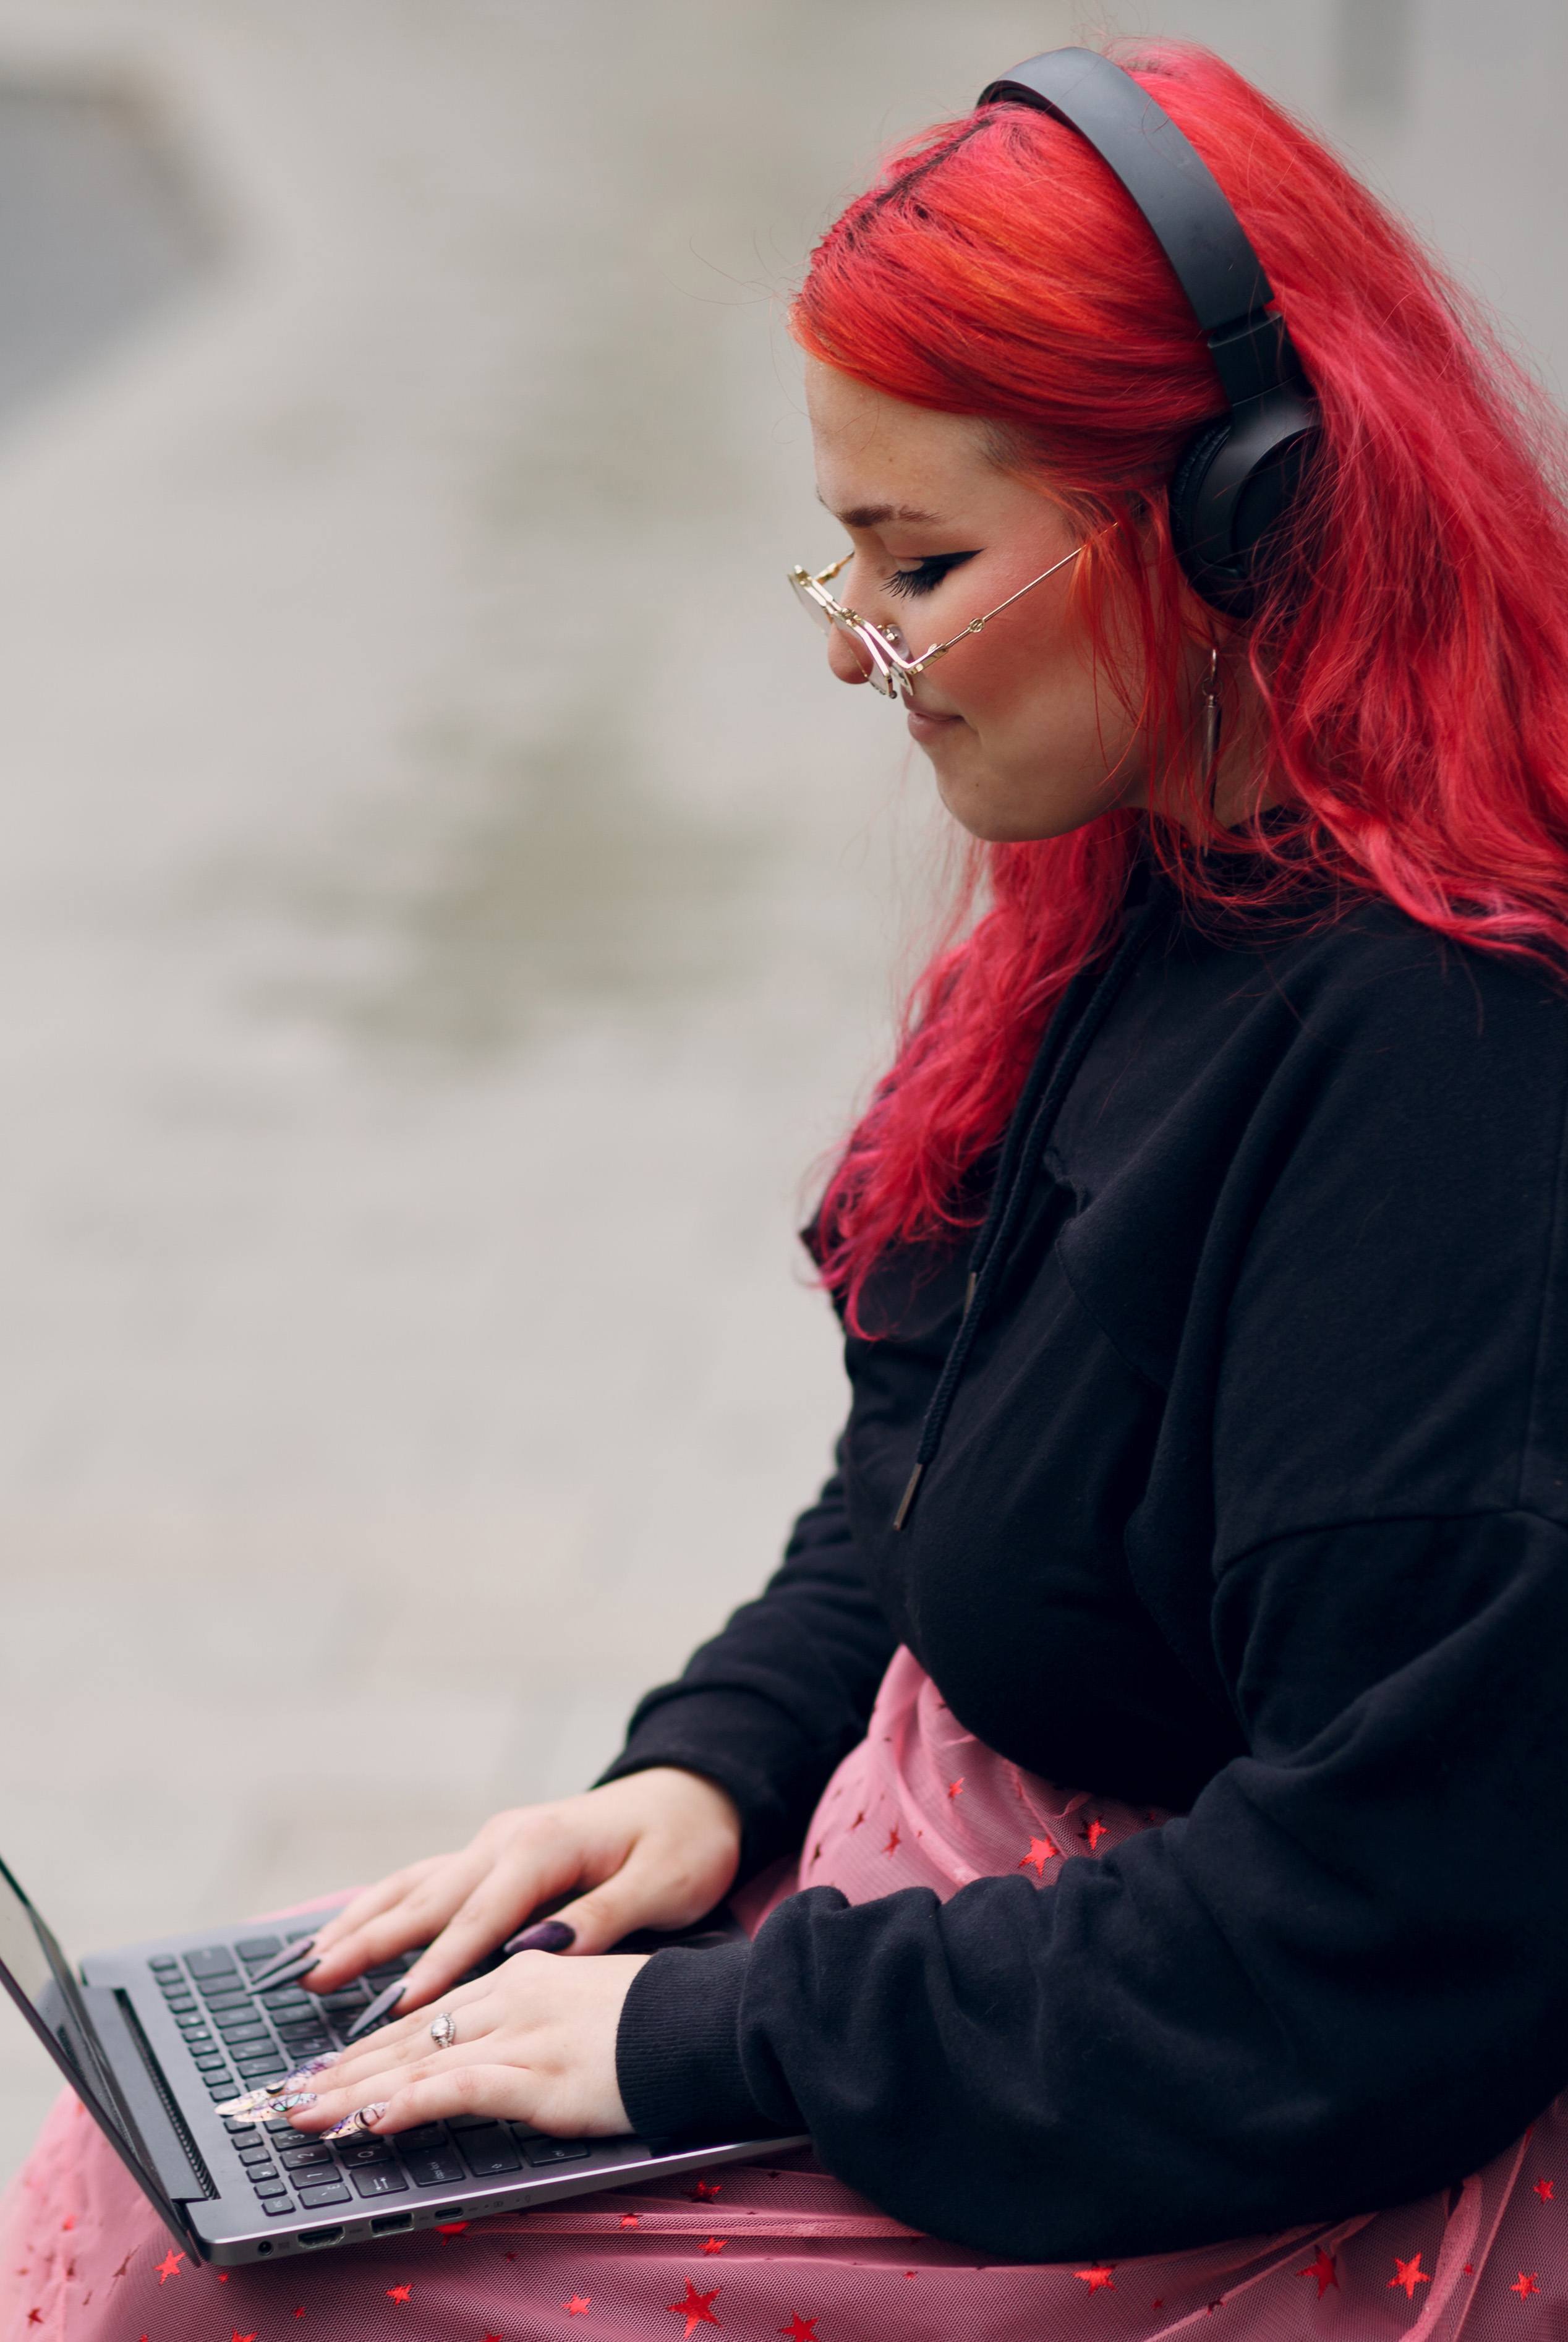 Caucasian plus-sized woman sits outdoors on a bench with a laptop on her lap. She has bright red, dyed hair, and wears glasses and headphones.